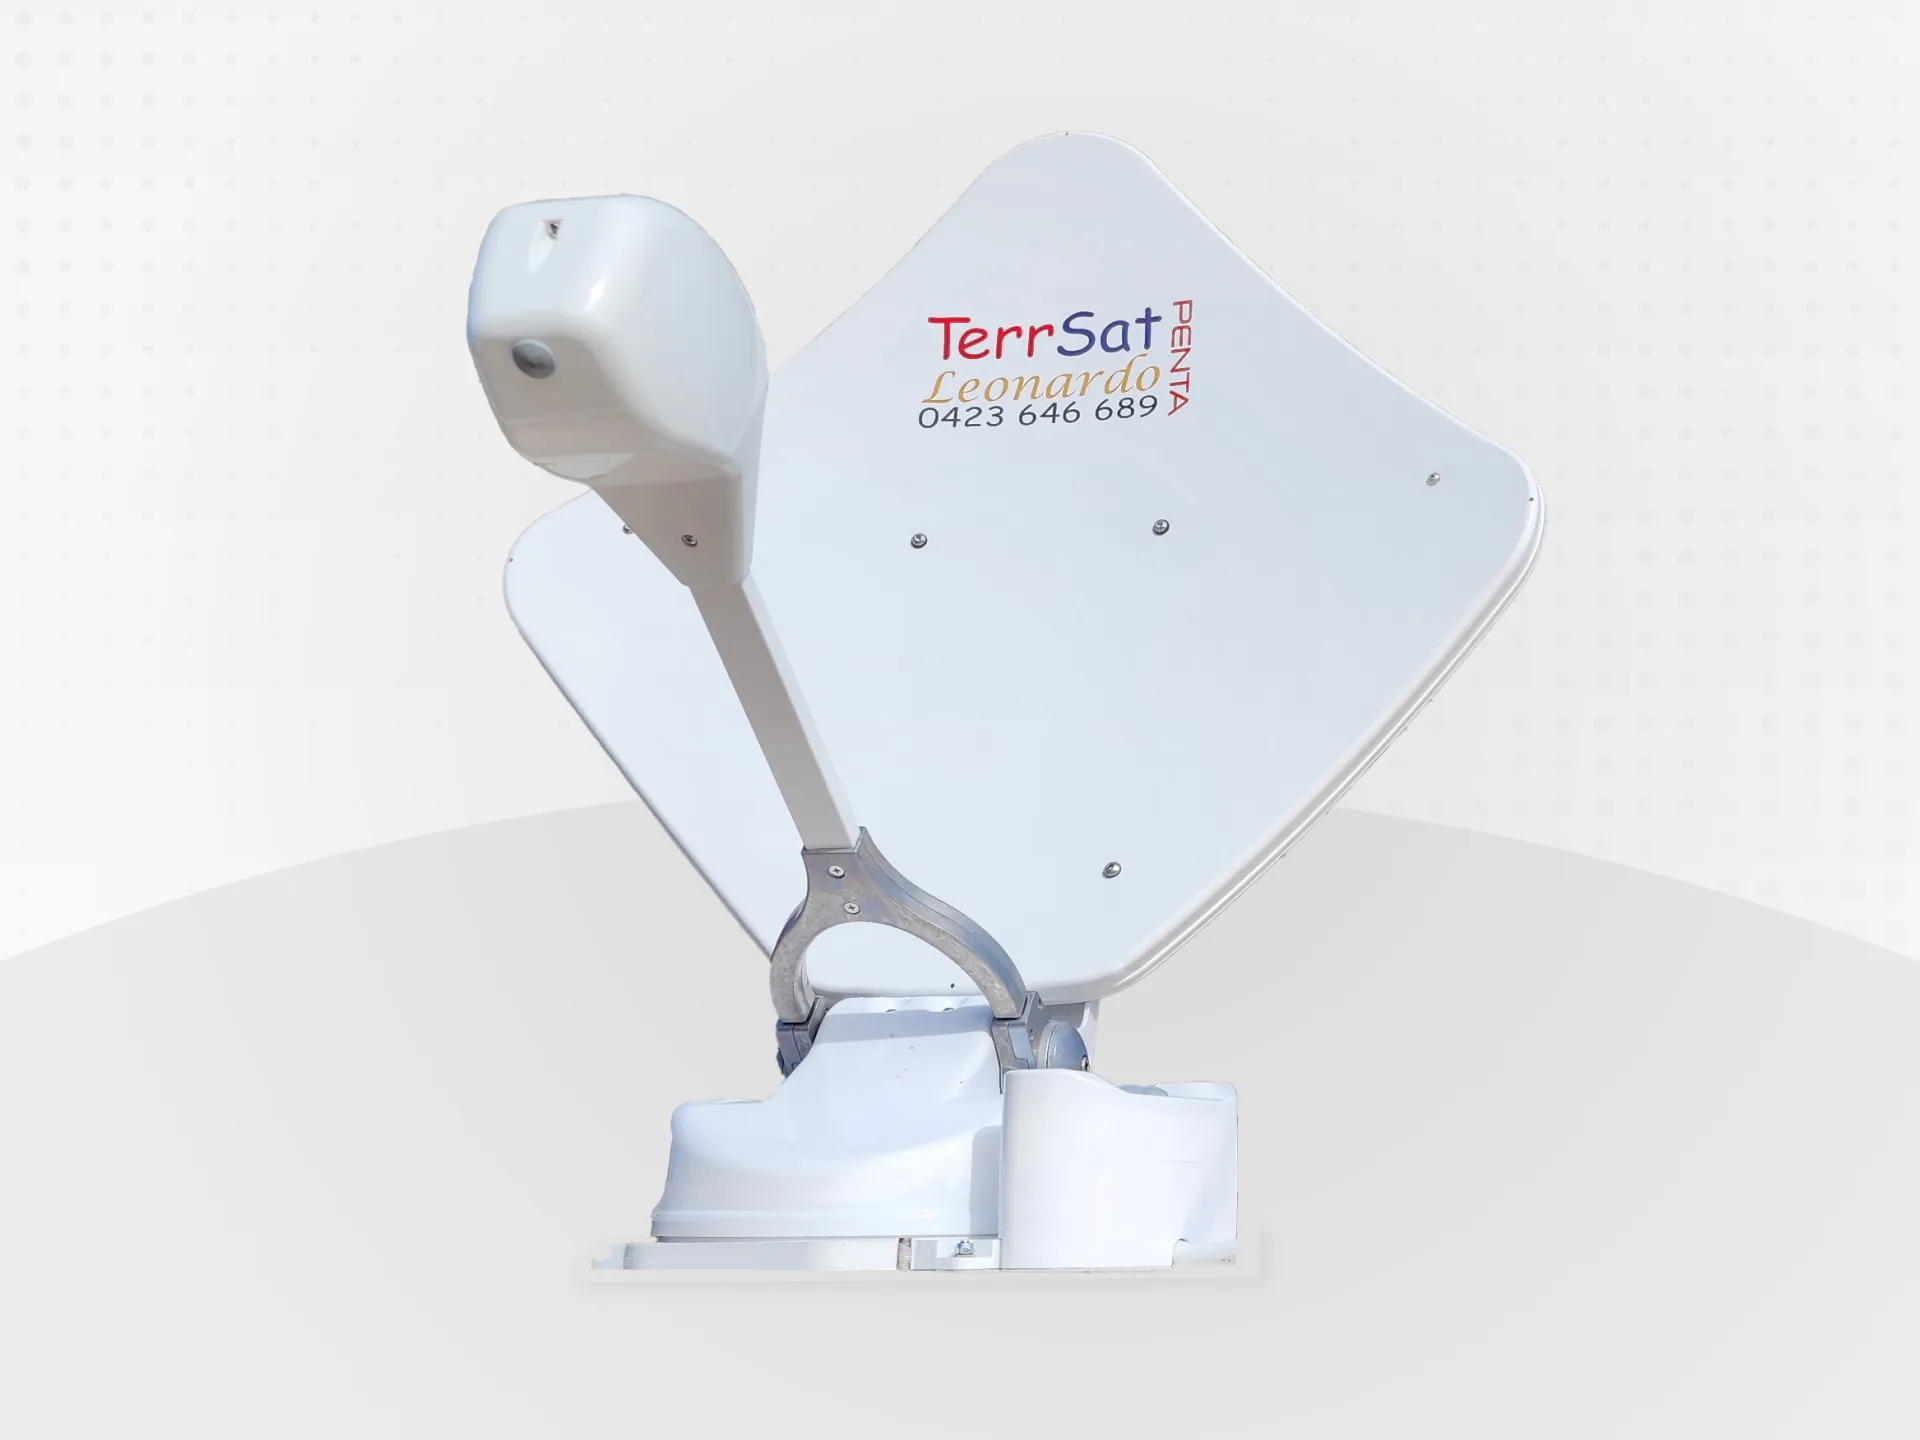 A mocked up graphic of a TerrSat antenna.